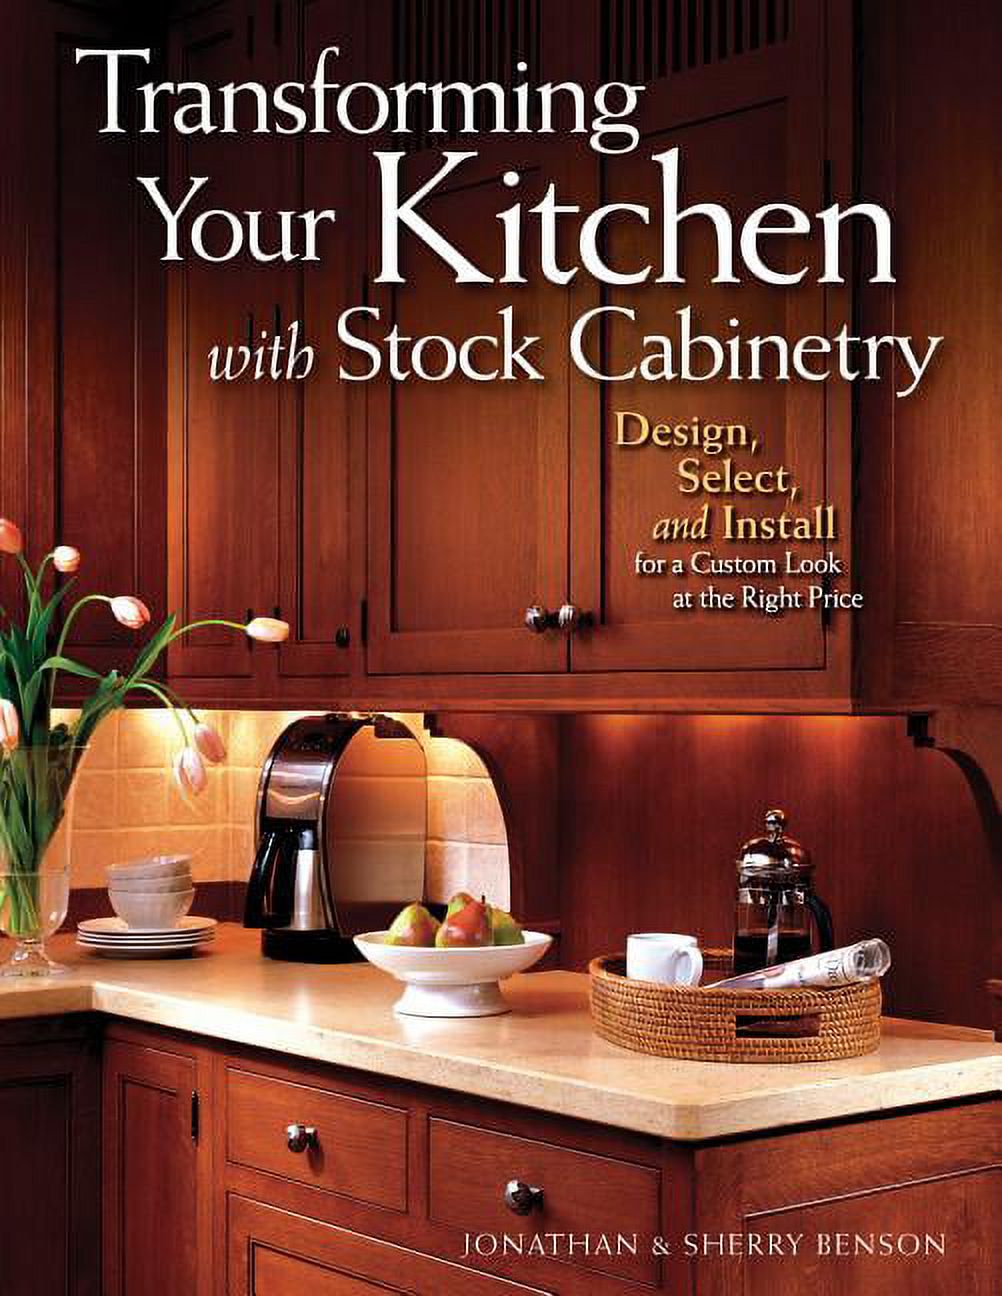 Transforming Your Kitchen with Stock Cabinetry: Design, Select, and Install for a Custom Look at the Right Price - image 1 of 1